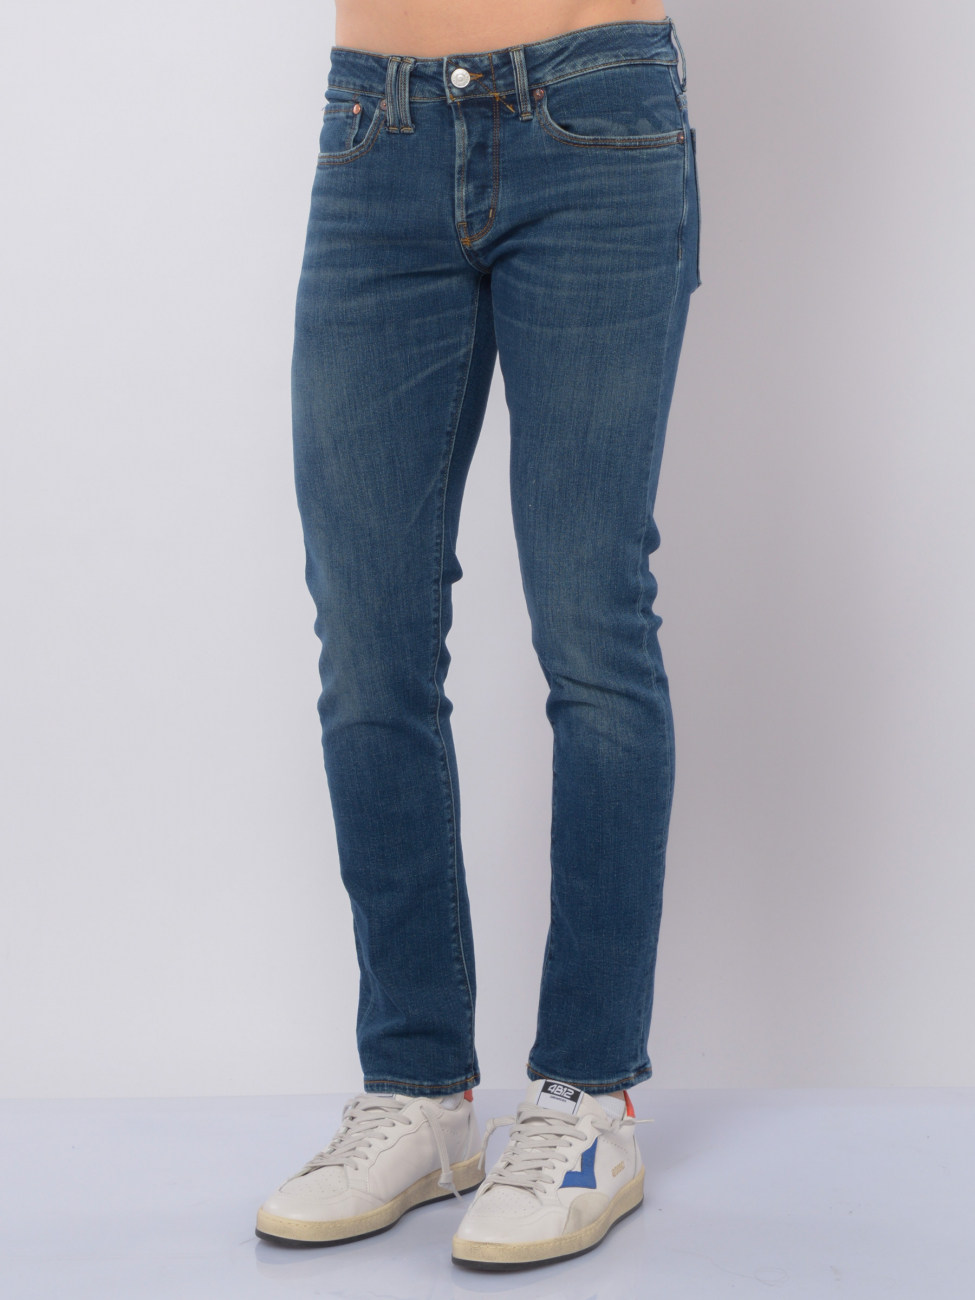 jeans da uomo Cycle stone washed con Skinny Fit